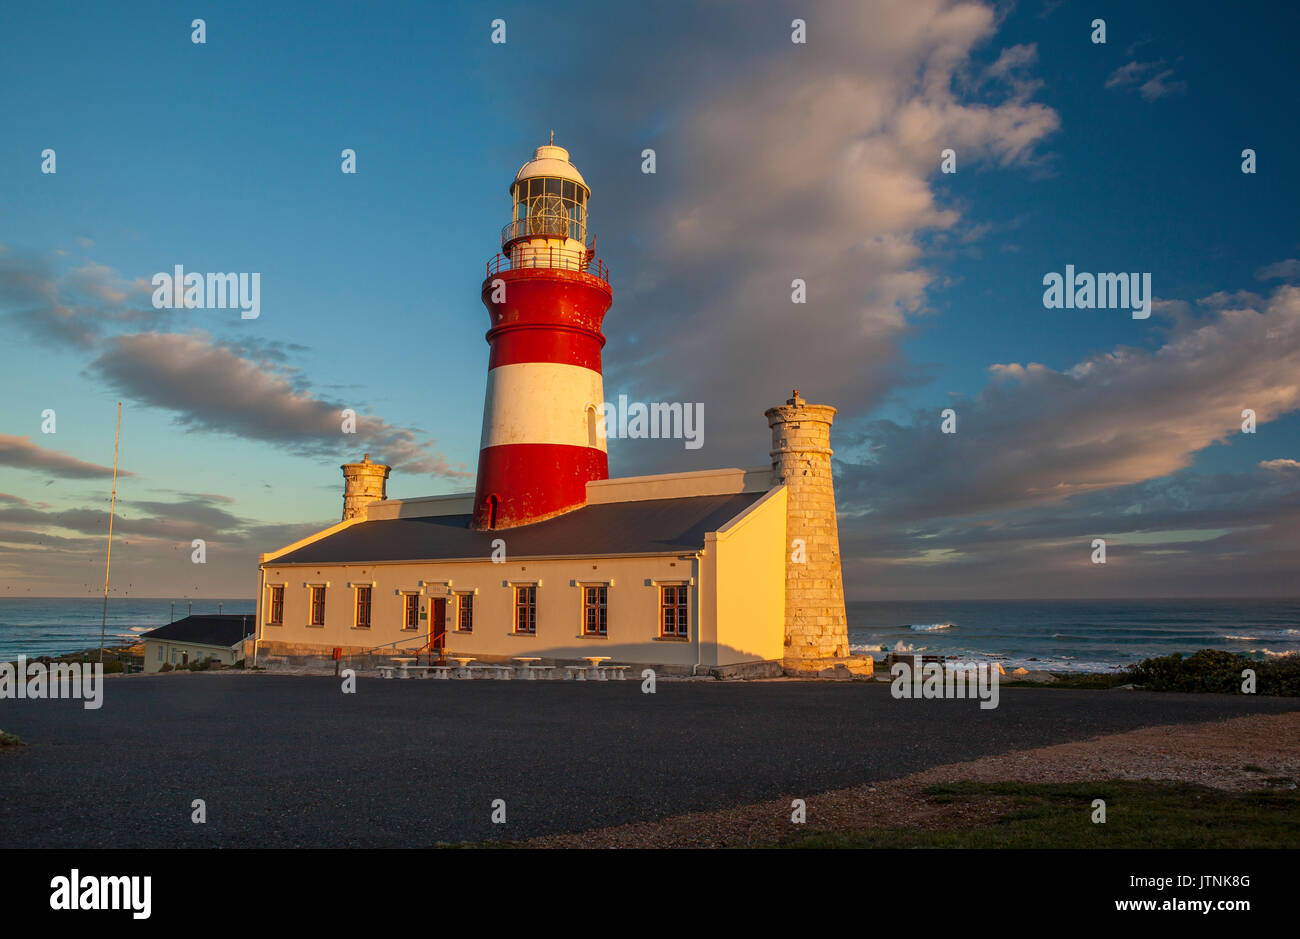 The historic 19th century lighthouse at Cape Agulhas, southernmost point of Africa, with its distinctive red tower and sandstone end towers at sunset Stock Photo